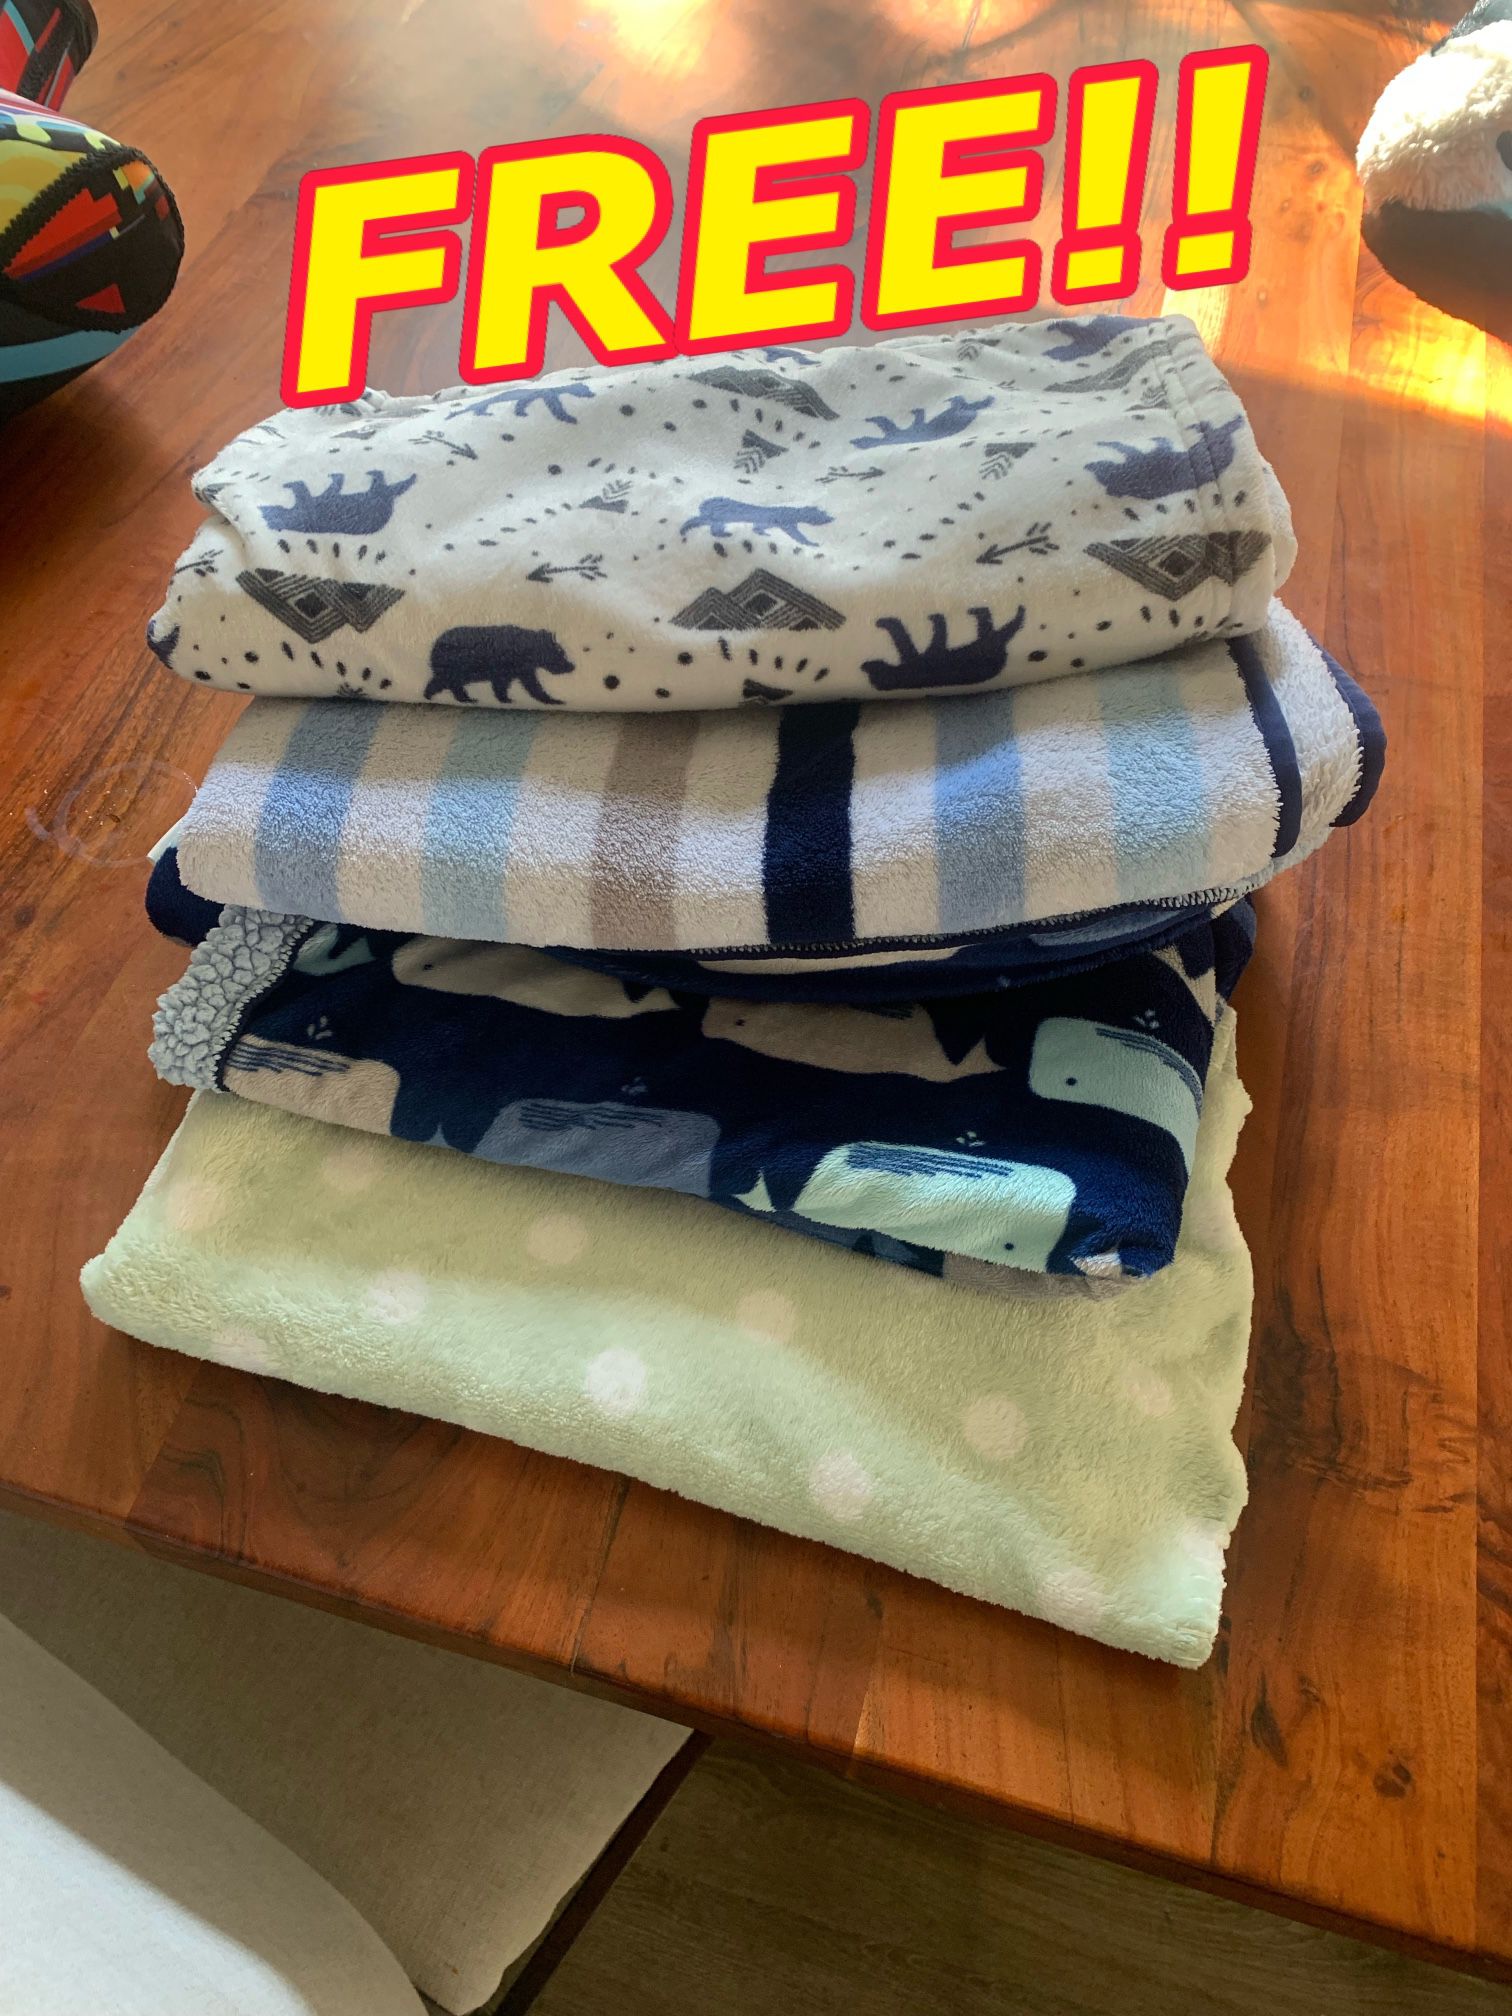 FREE BABY BLANKETS!! 